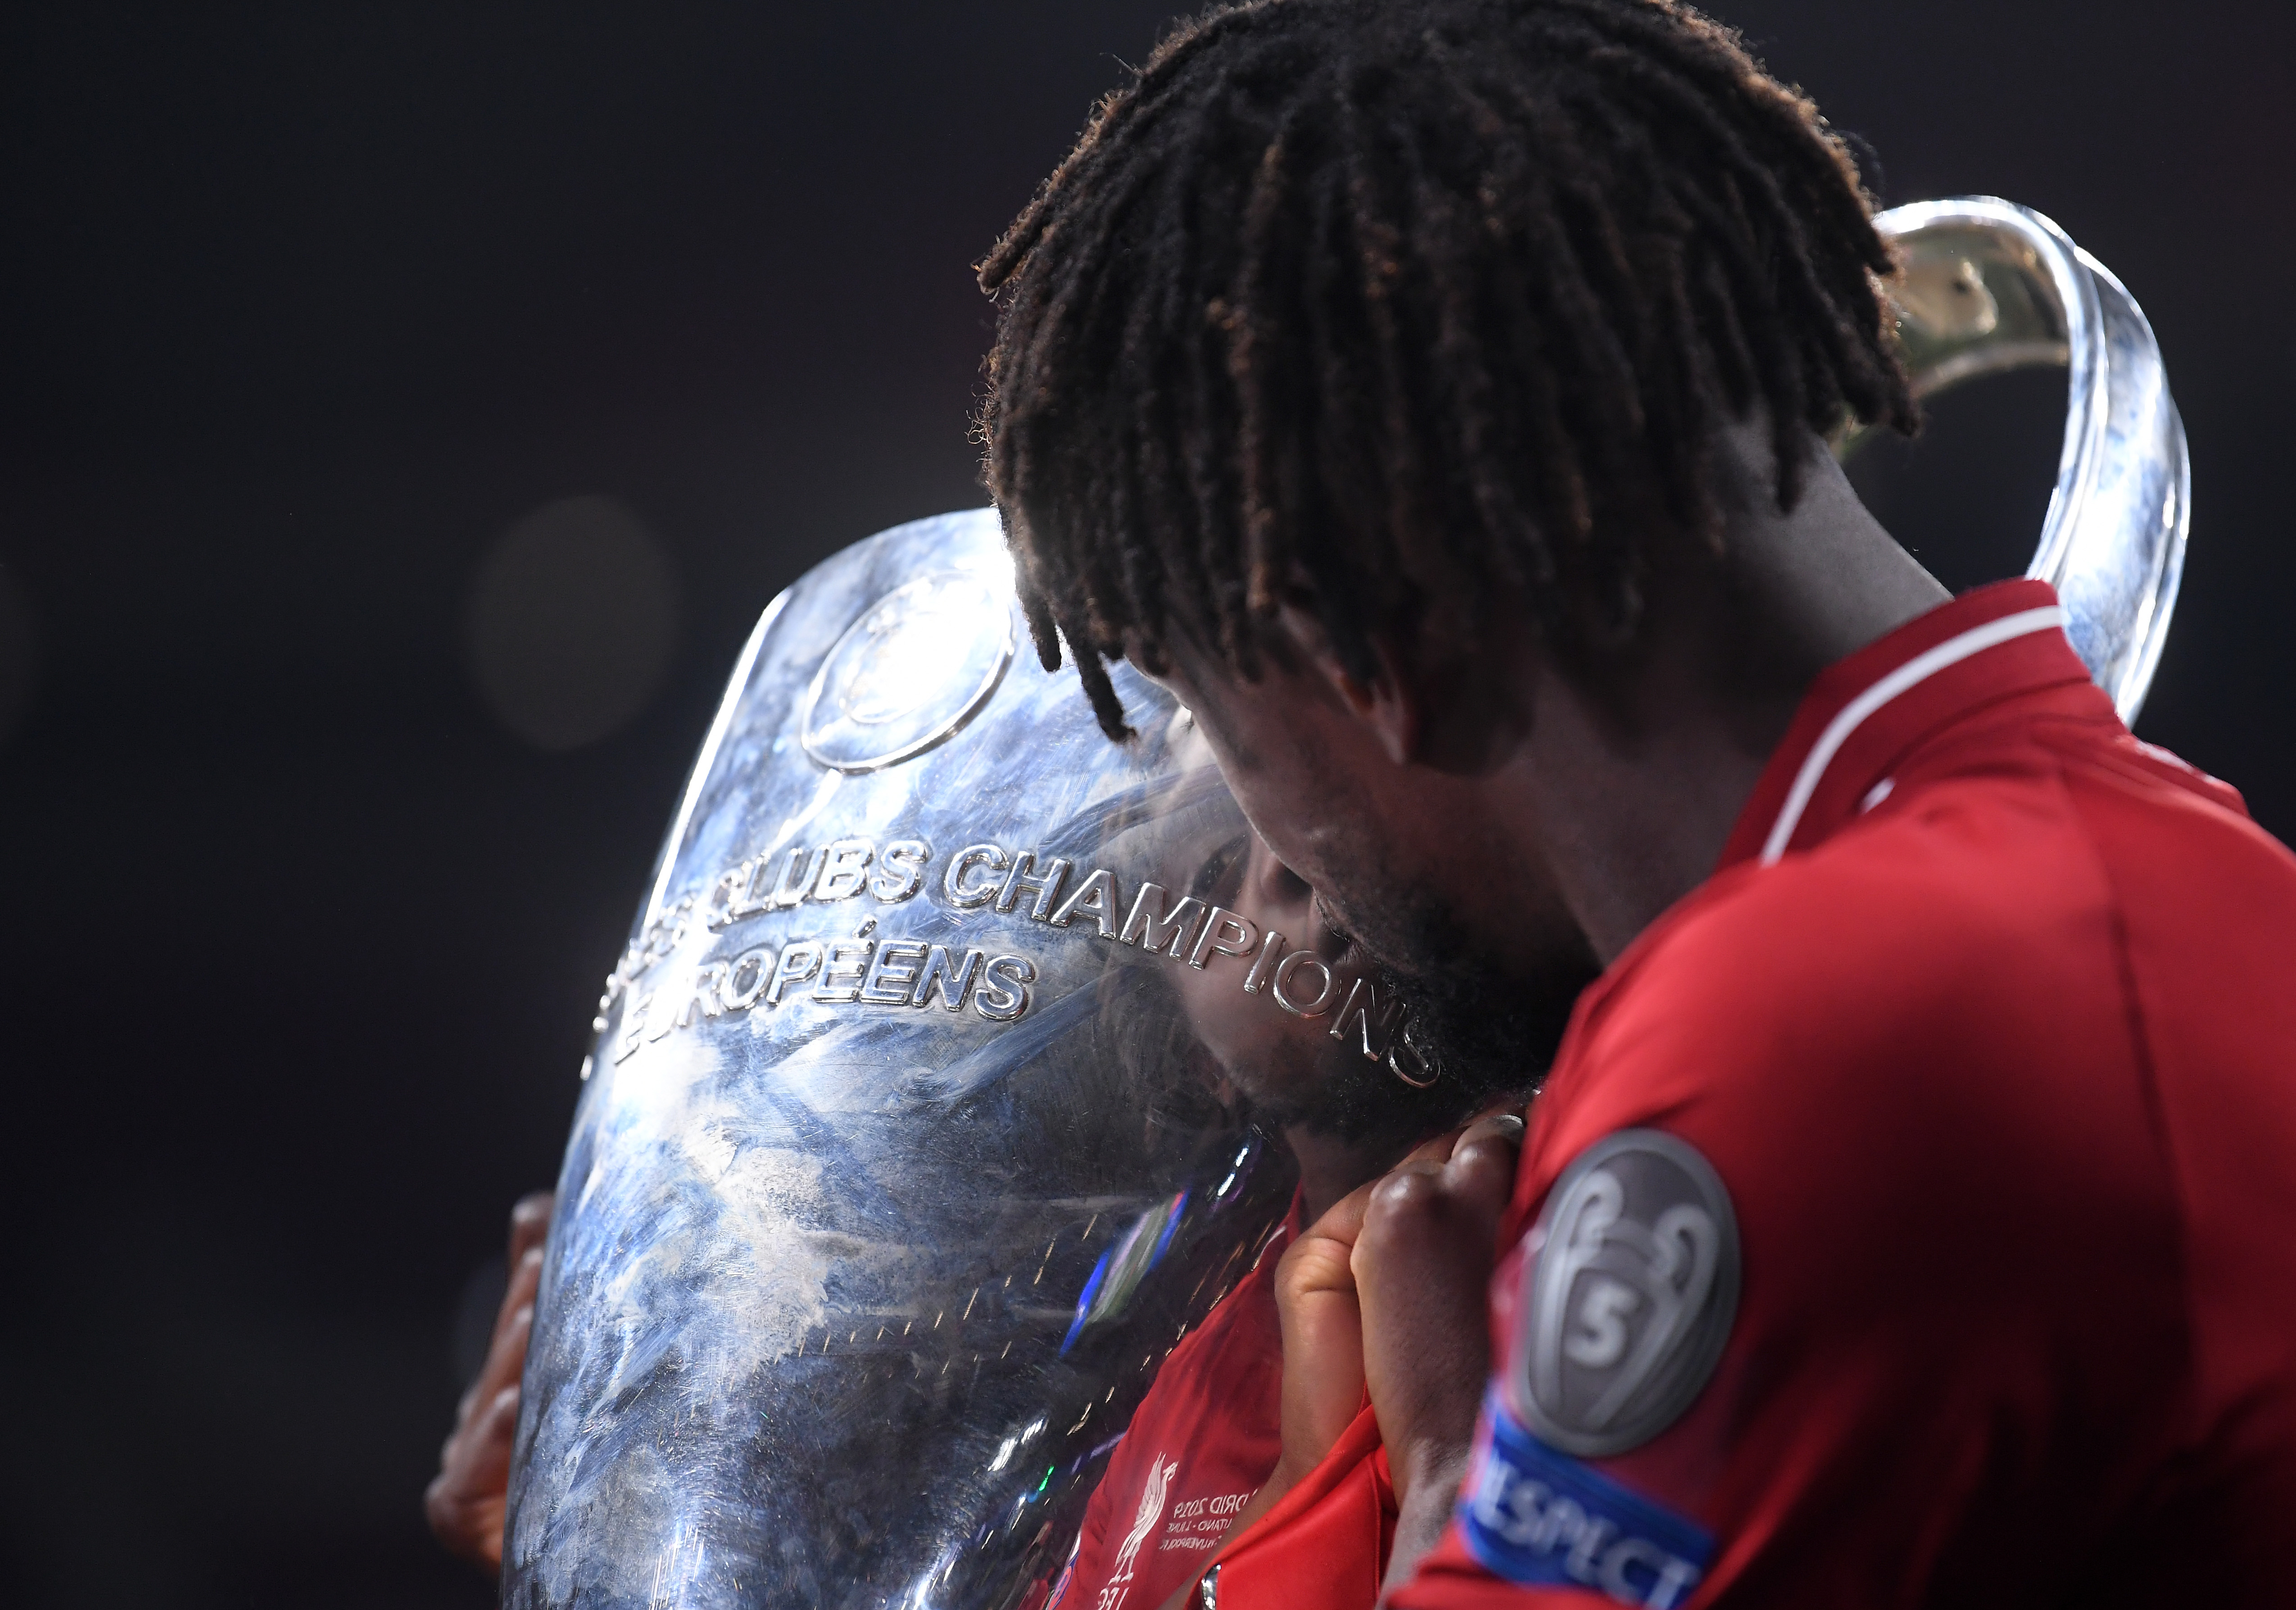 MADRID, SPAIN - JUNE 01: Divock Origi of Liverpool celebrates with the Champions League Trophy after winning the UEFA Champions League Final between Tottenham Hotspur and Liverpool at Estadio Wanda Metropolitano on June 01, 2019 in Madrid, Spain. (Photo by Laurence Griffiths/Getty Images)